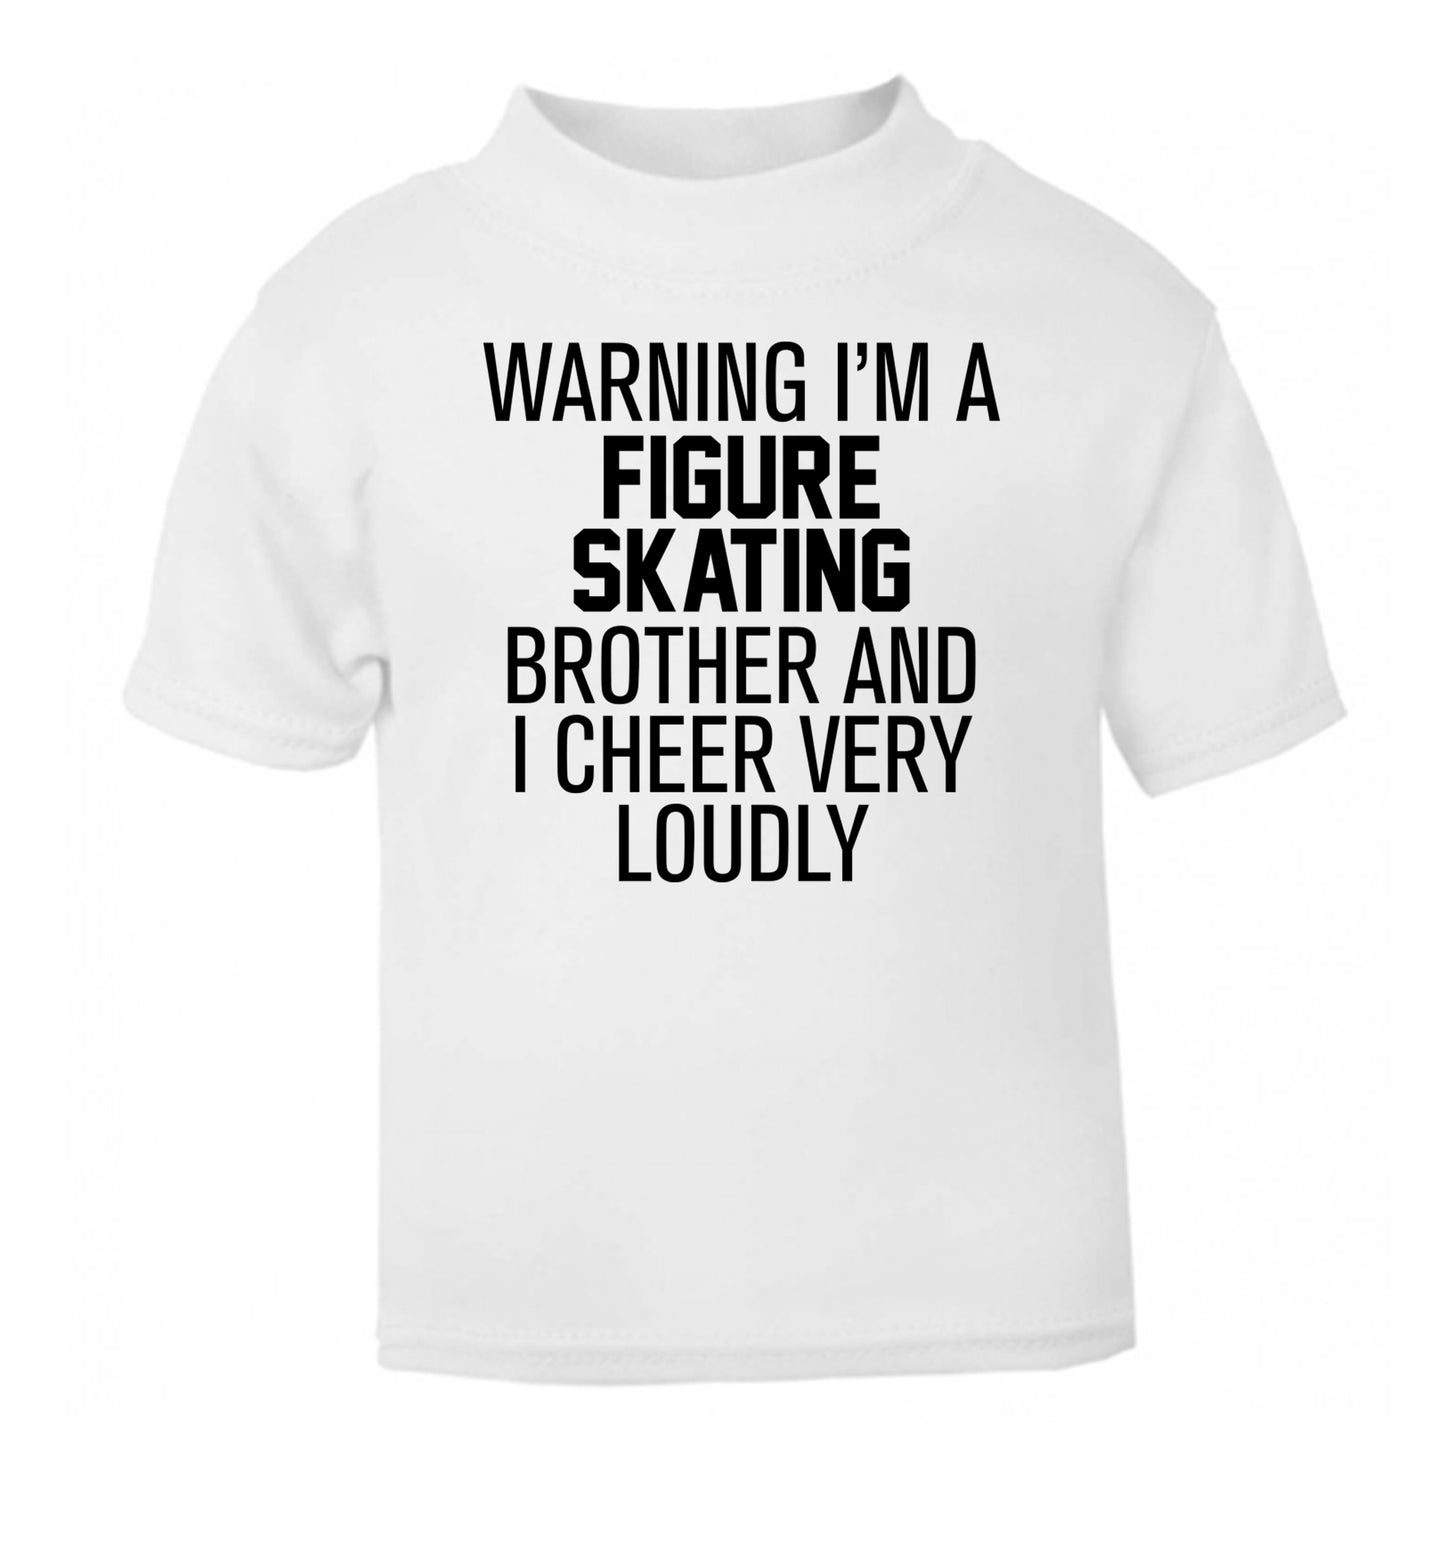 Warning I'm a figure skating brother and I cheer very loudly white Baby Toddler Tshirt 2 Years